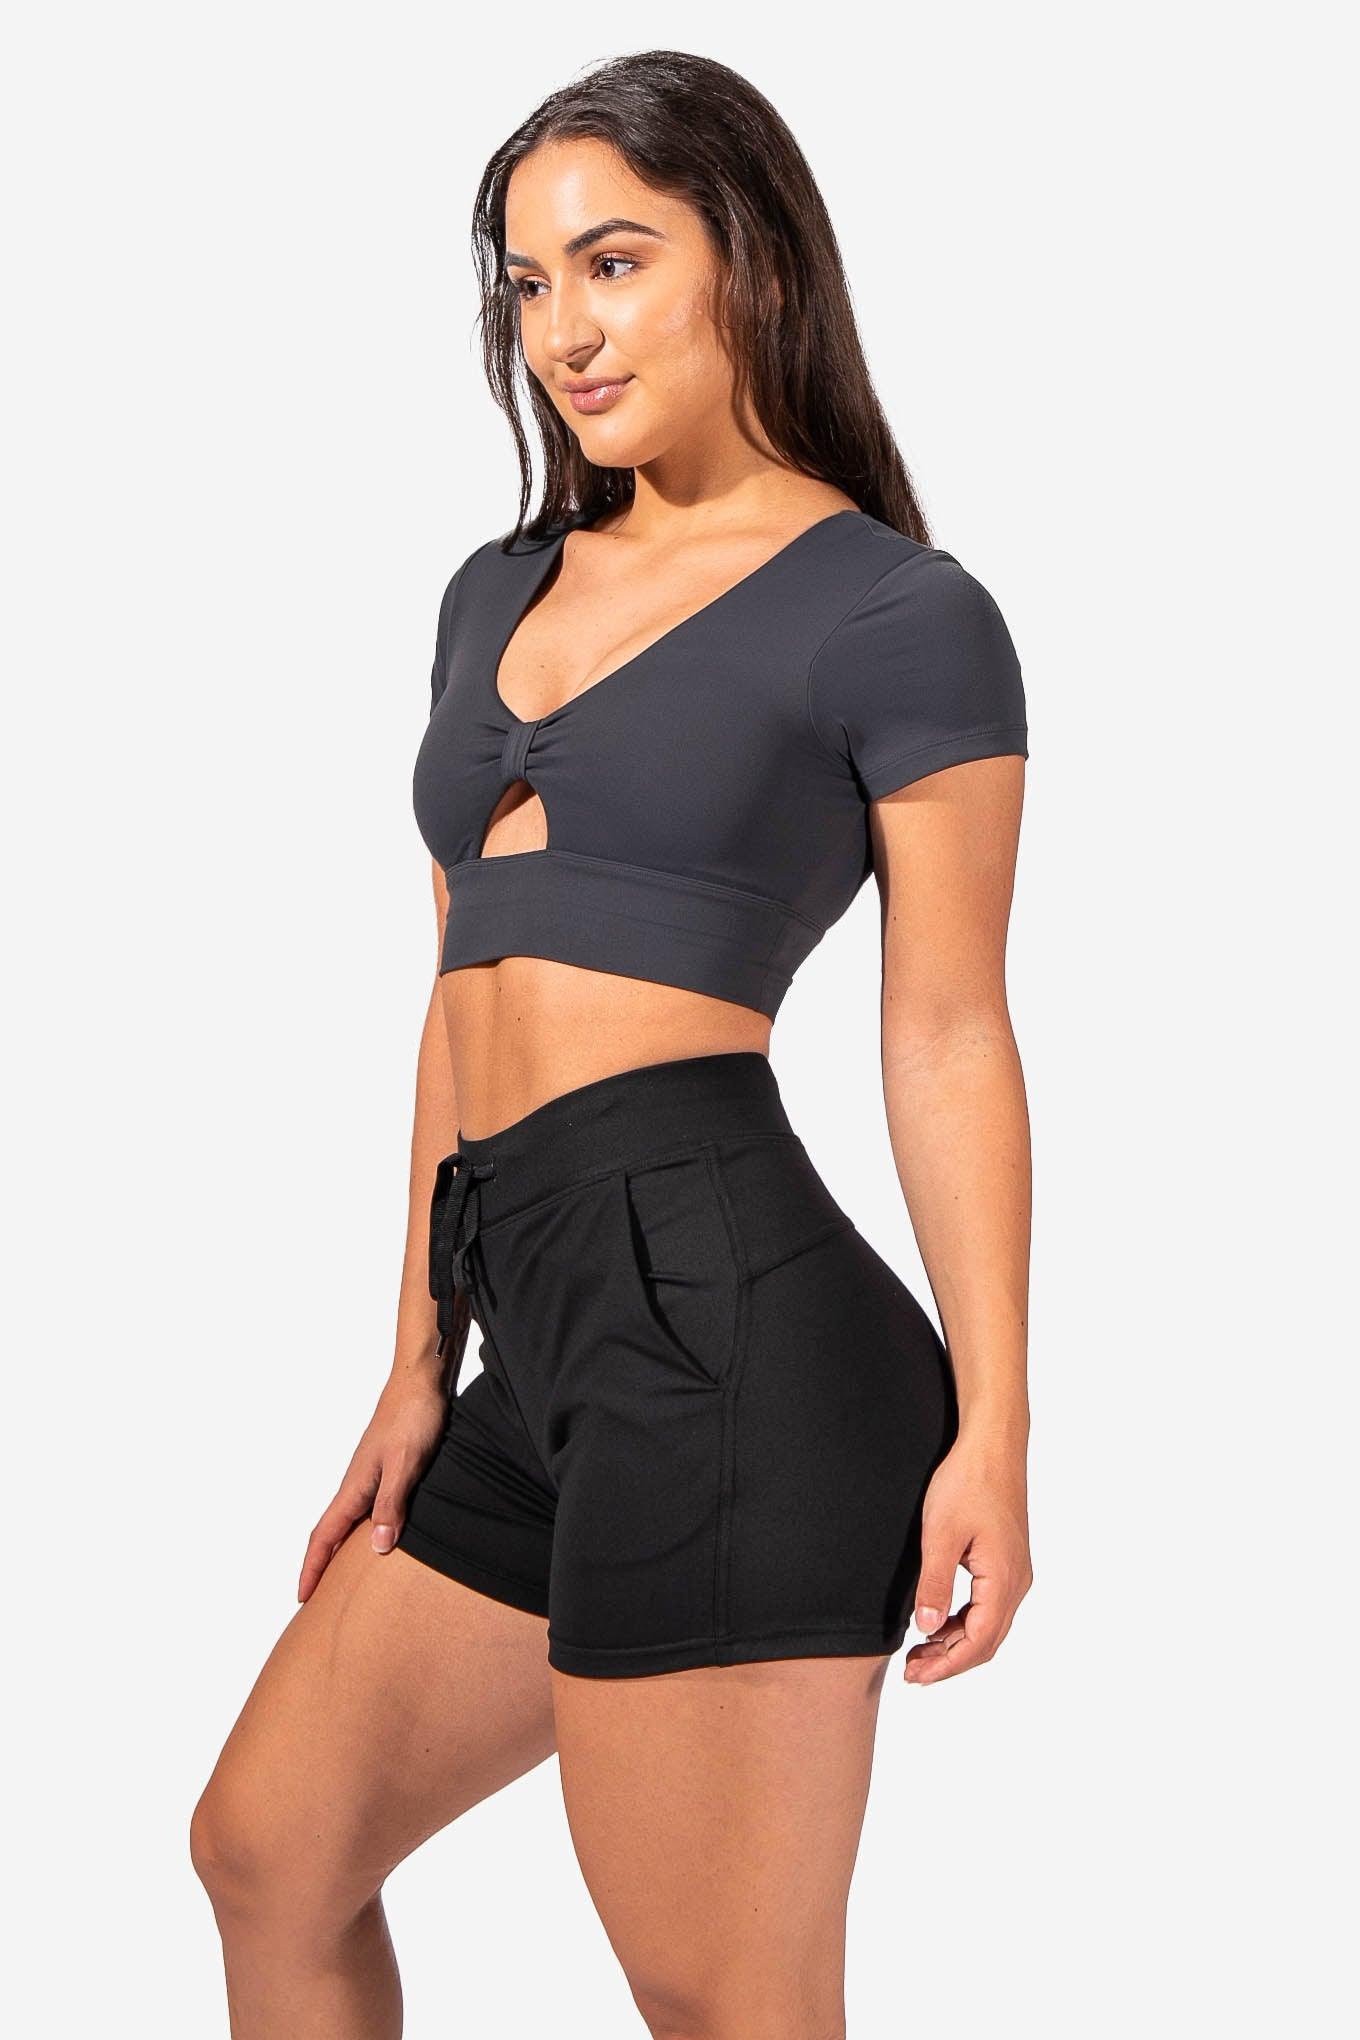 Black Personalised Crop Top and Shorts Set